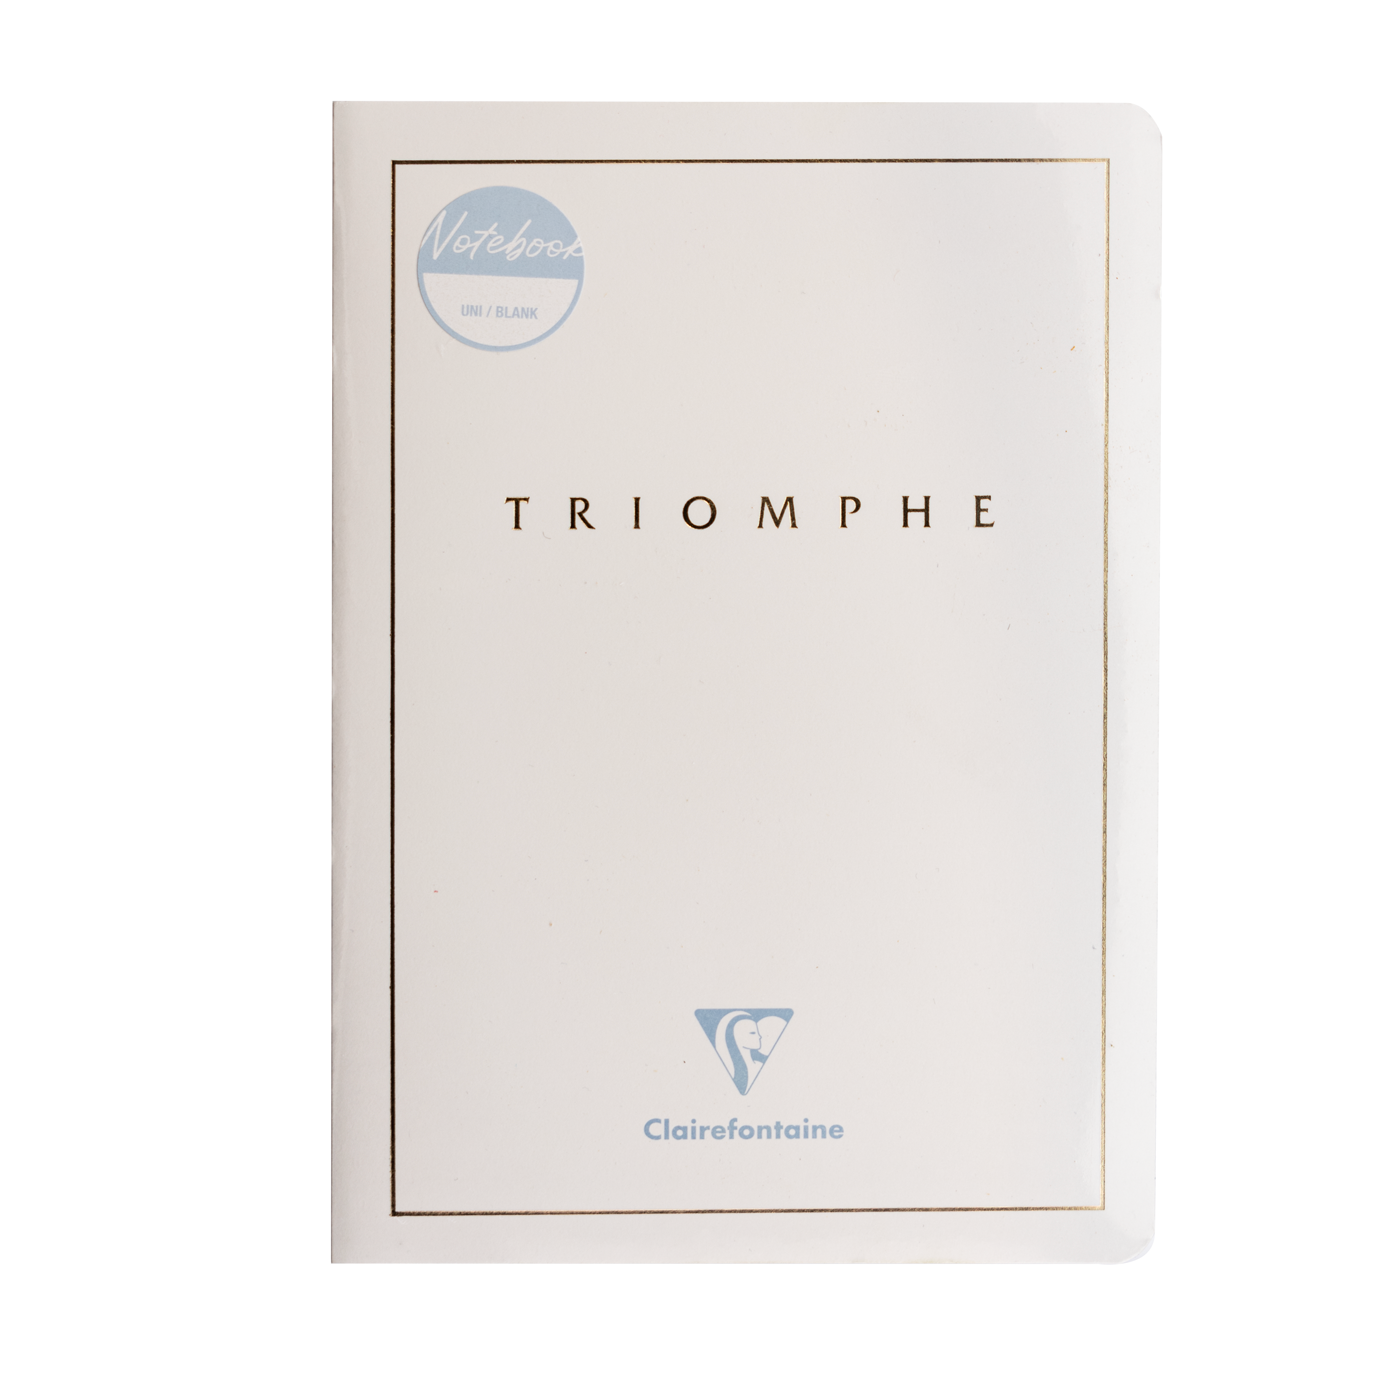 Clairefontaine Triomphe A5 Uni/Blank Notebook